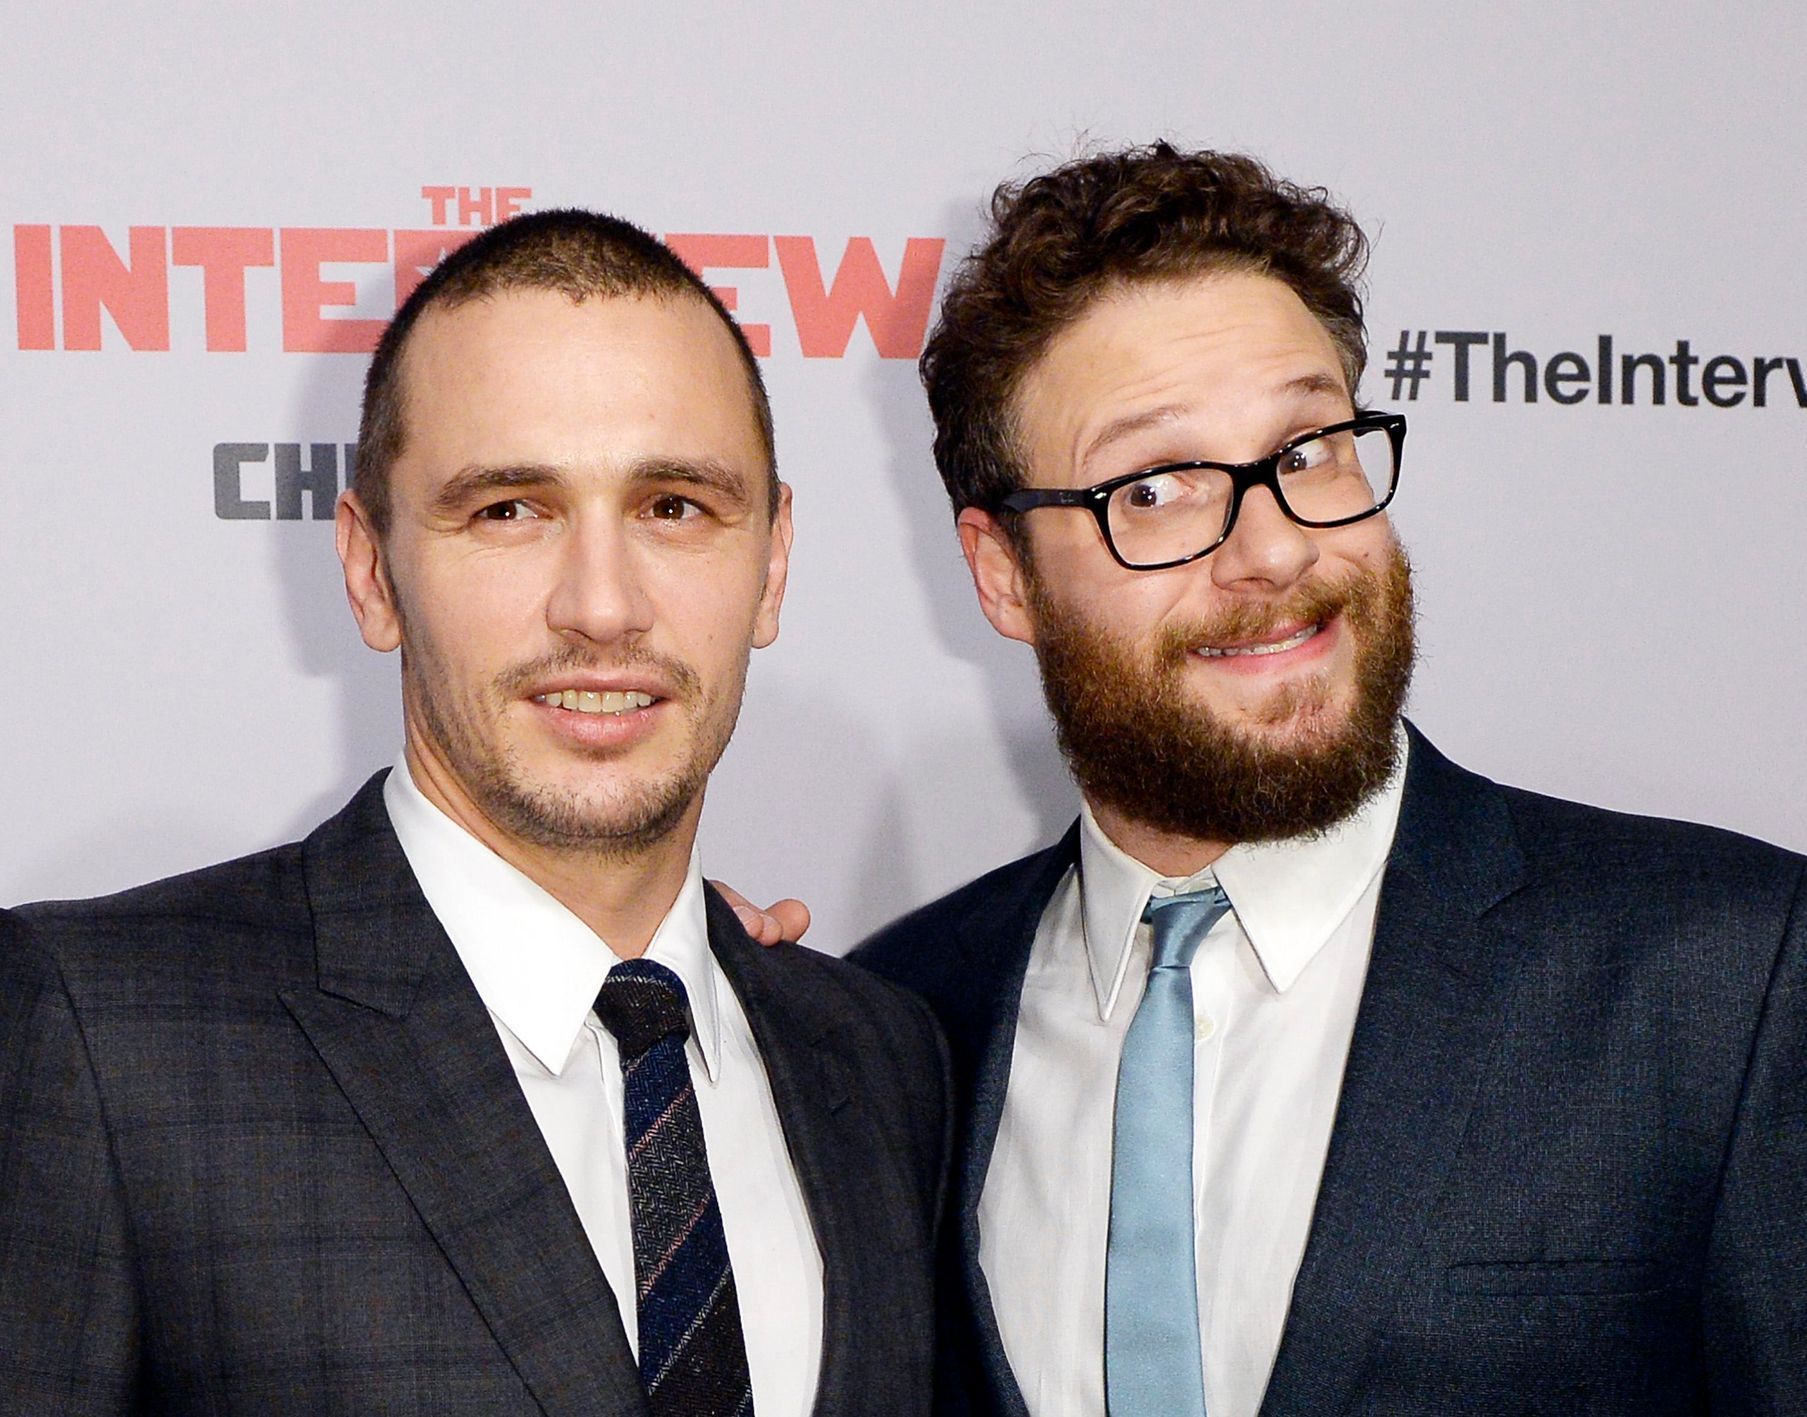 Cast members Franco and Rogen pose during premiere of the film &quot;The Interview&quot; in Los Angeles